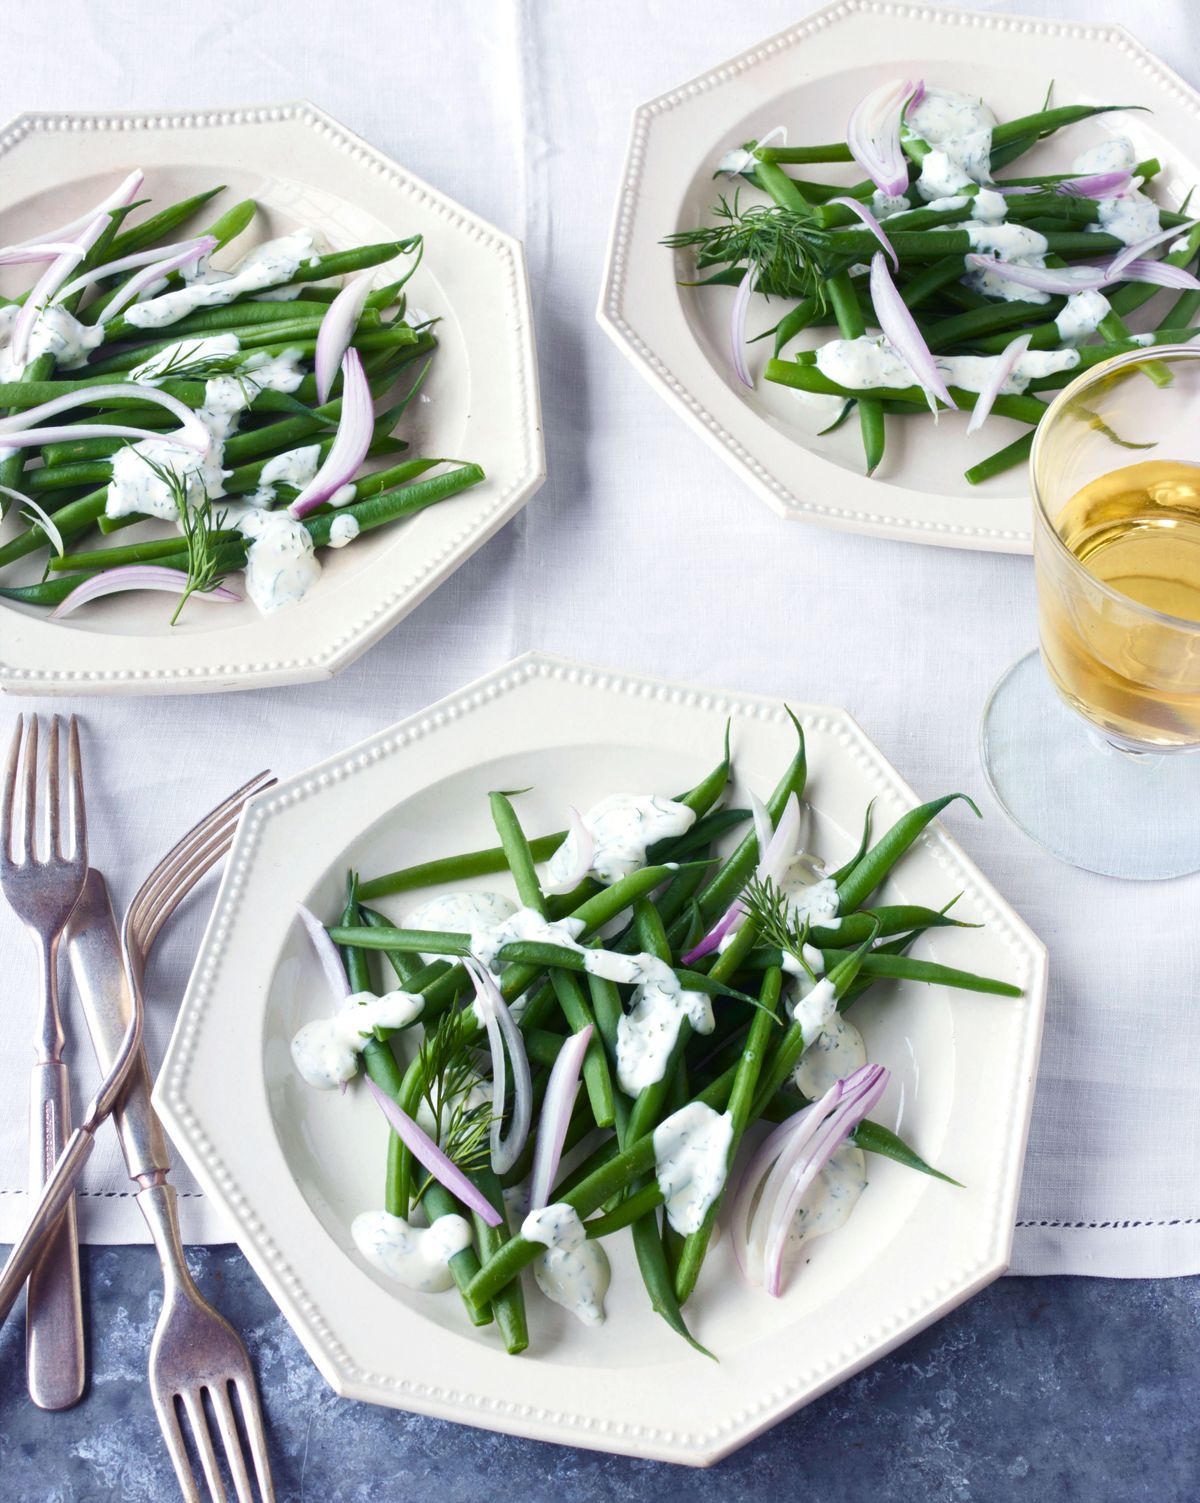 haricots verts with green goddess dressing